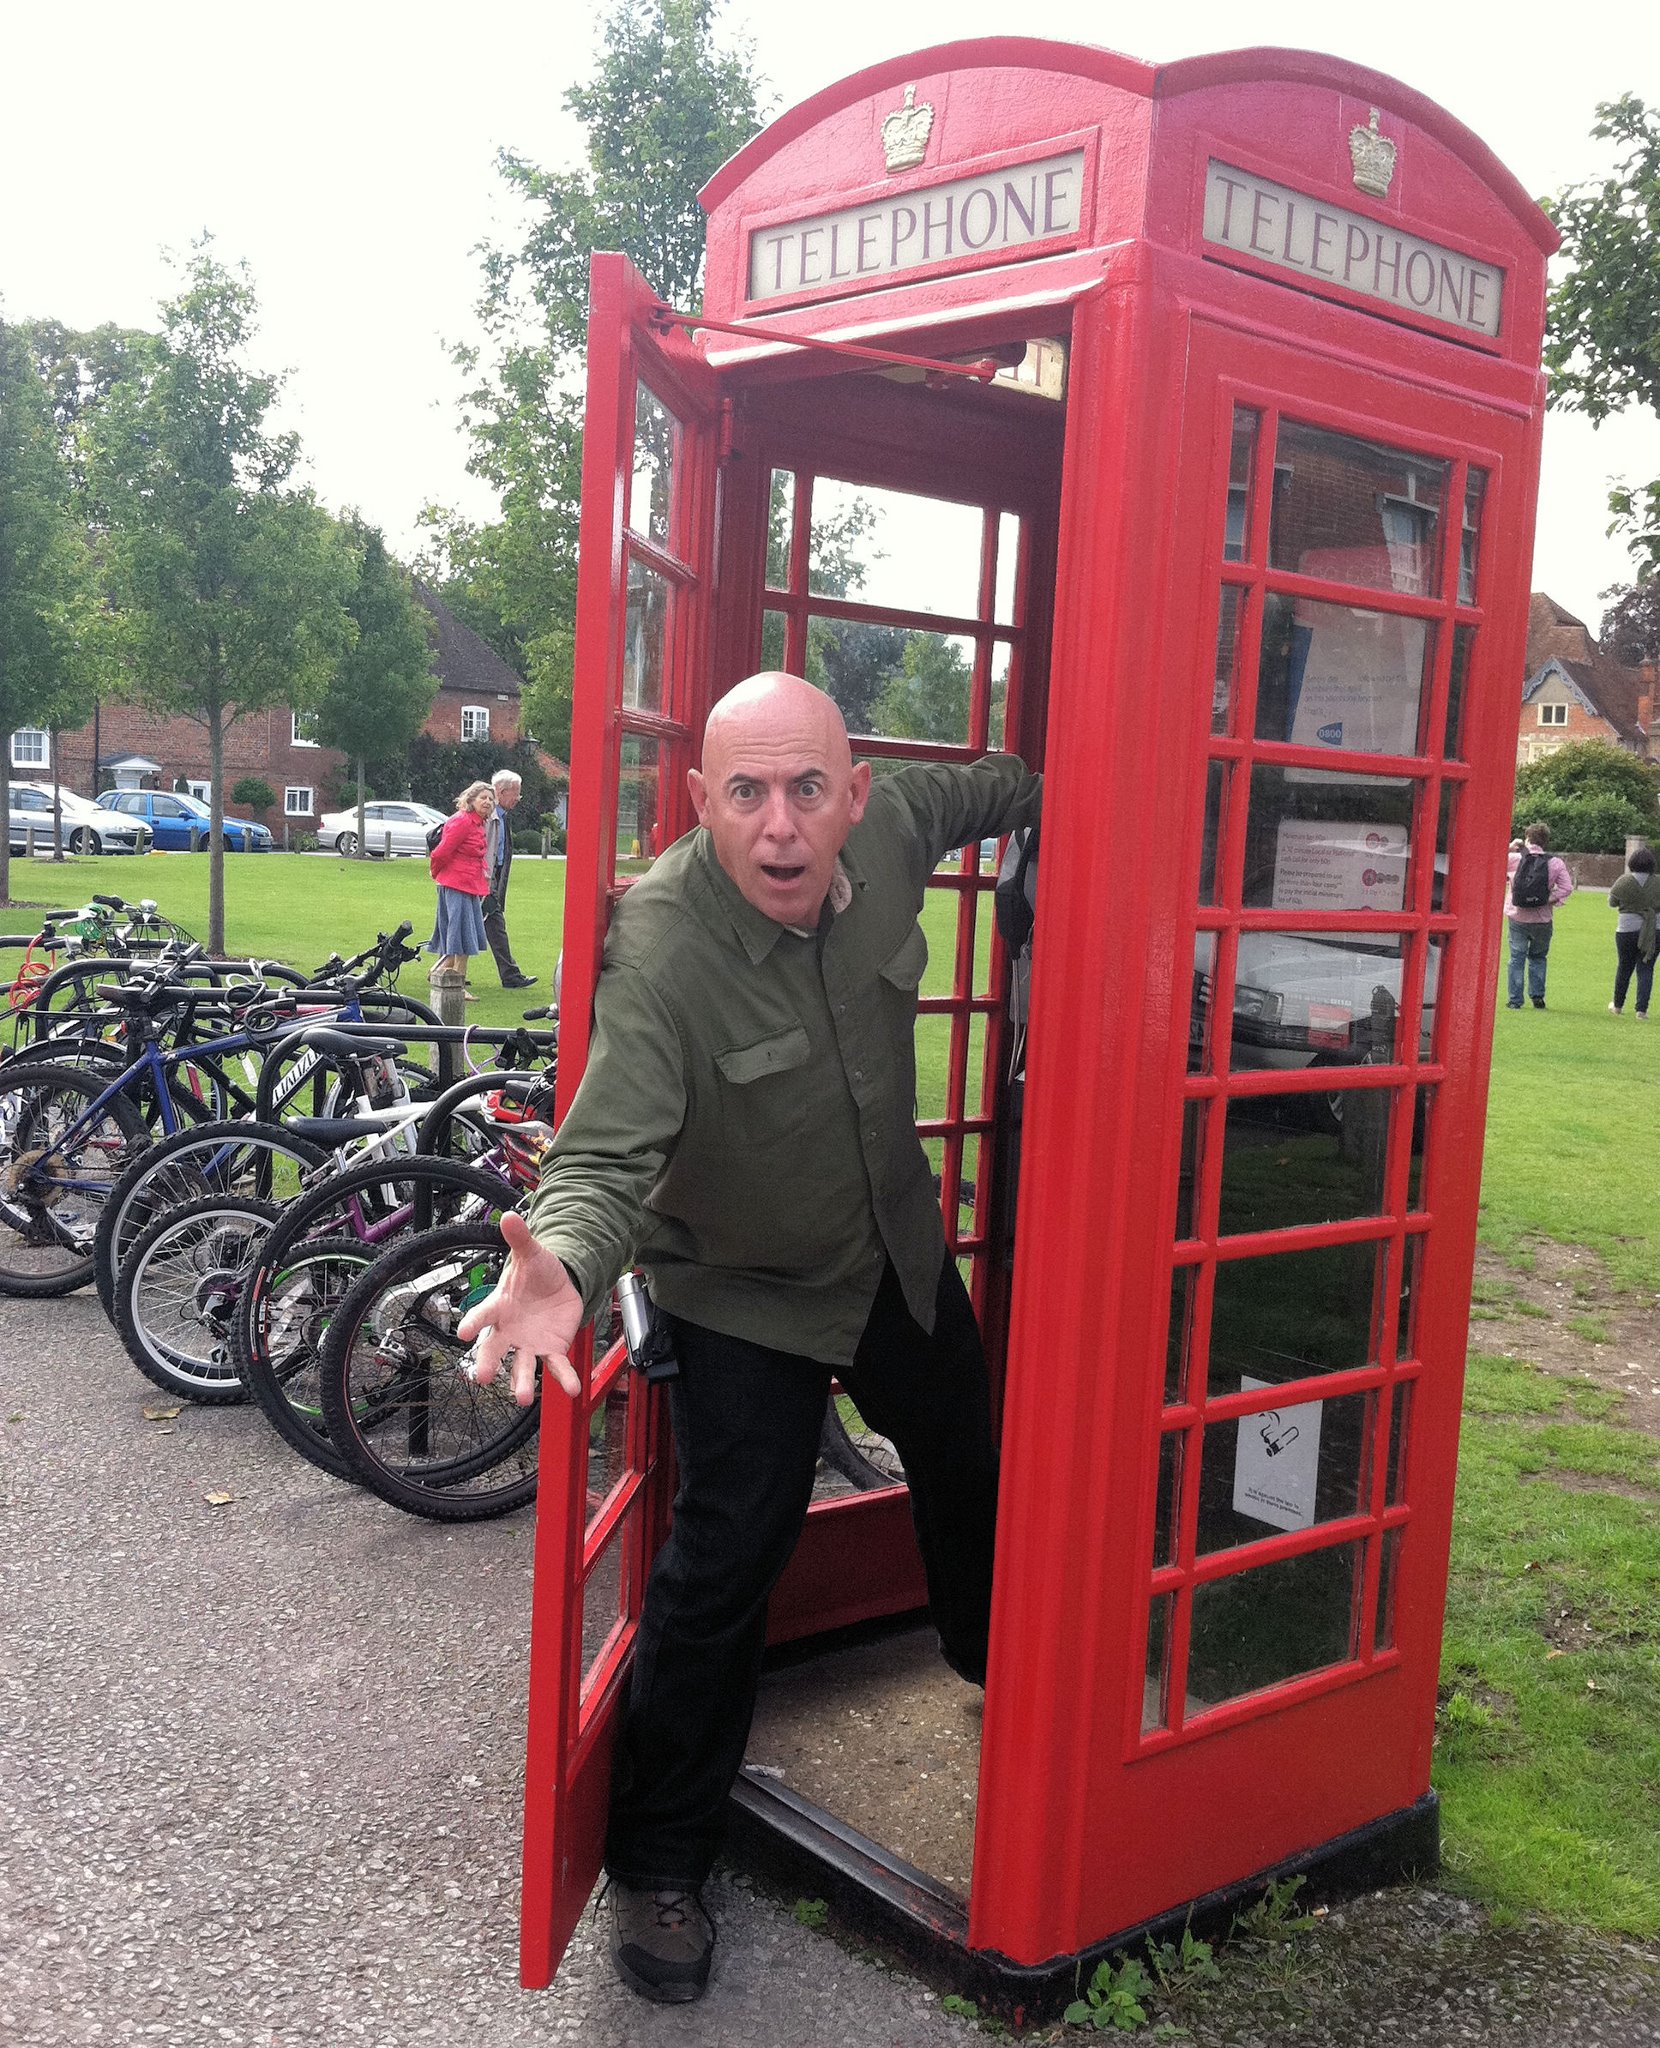 Glenn in Salisbury, England, just back from a visit to the 27th Century via this convenient Tardis.